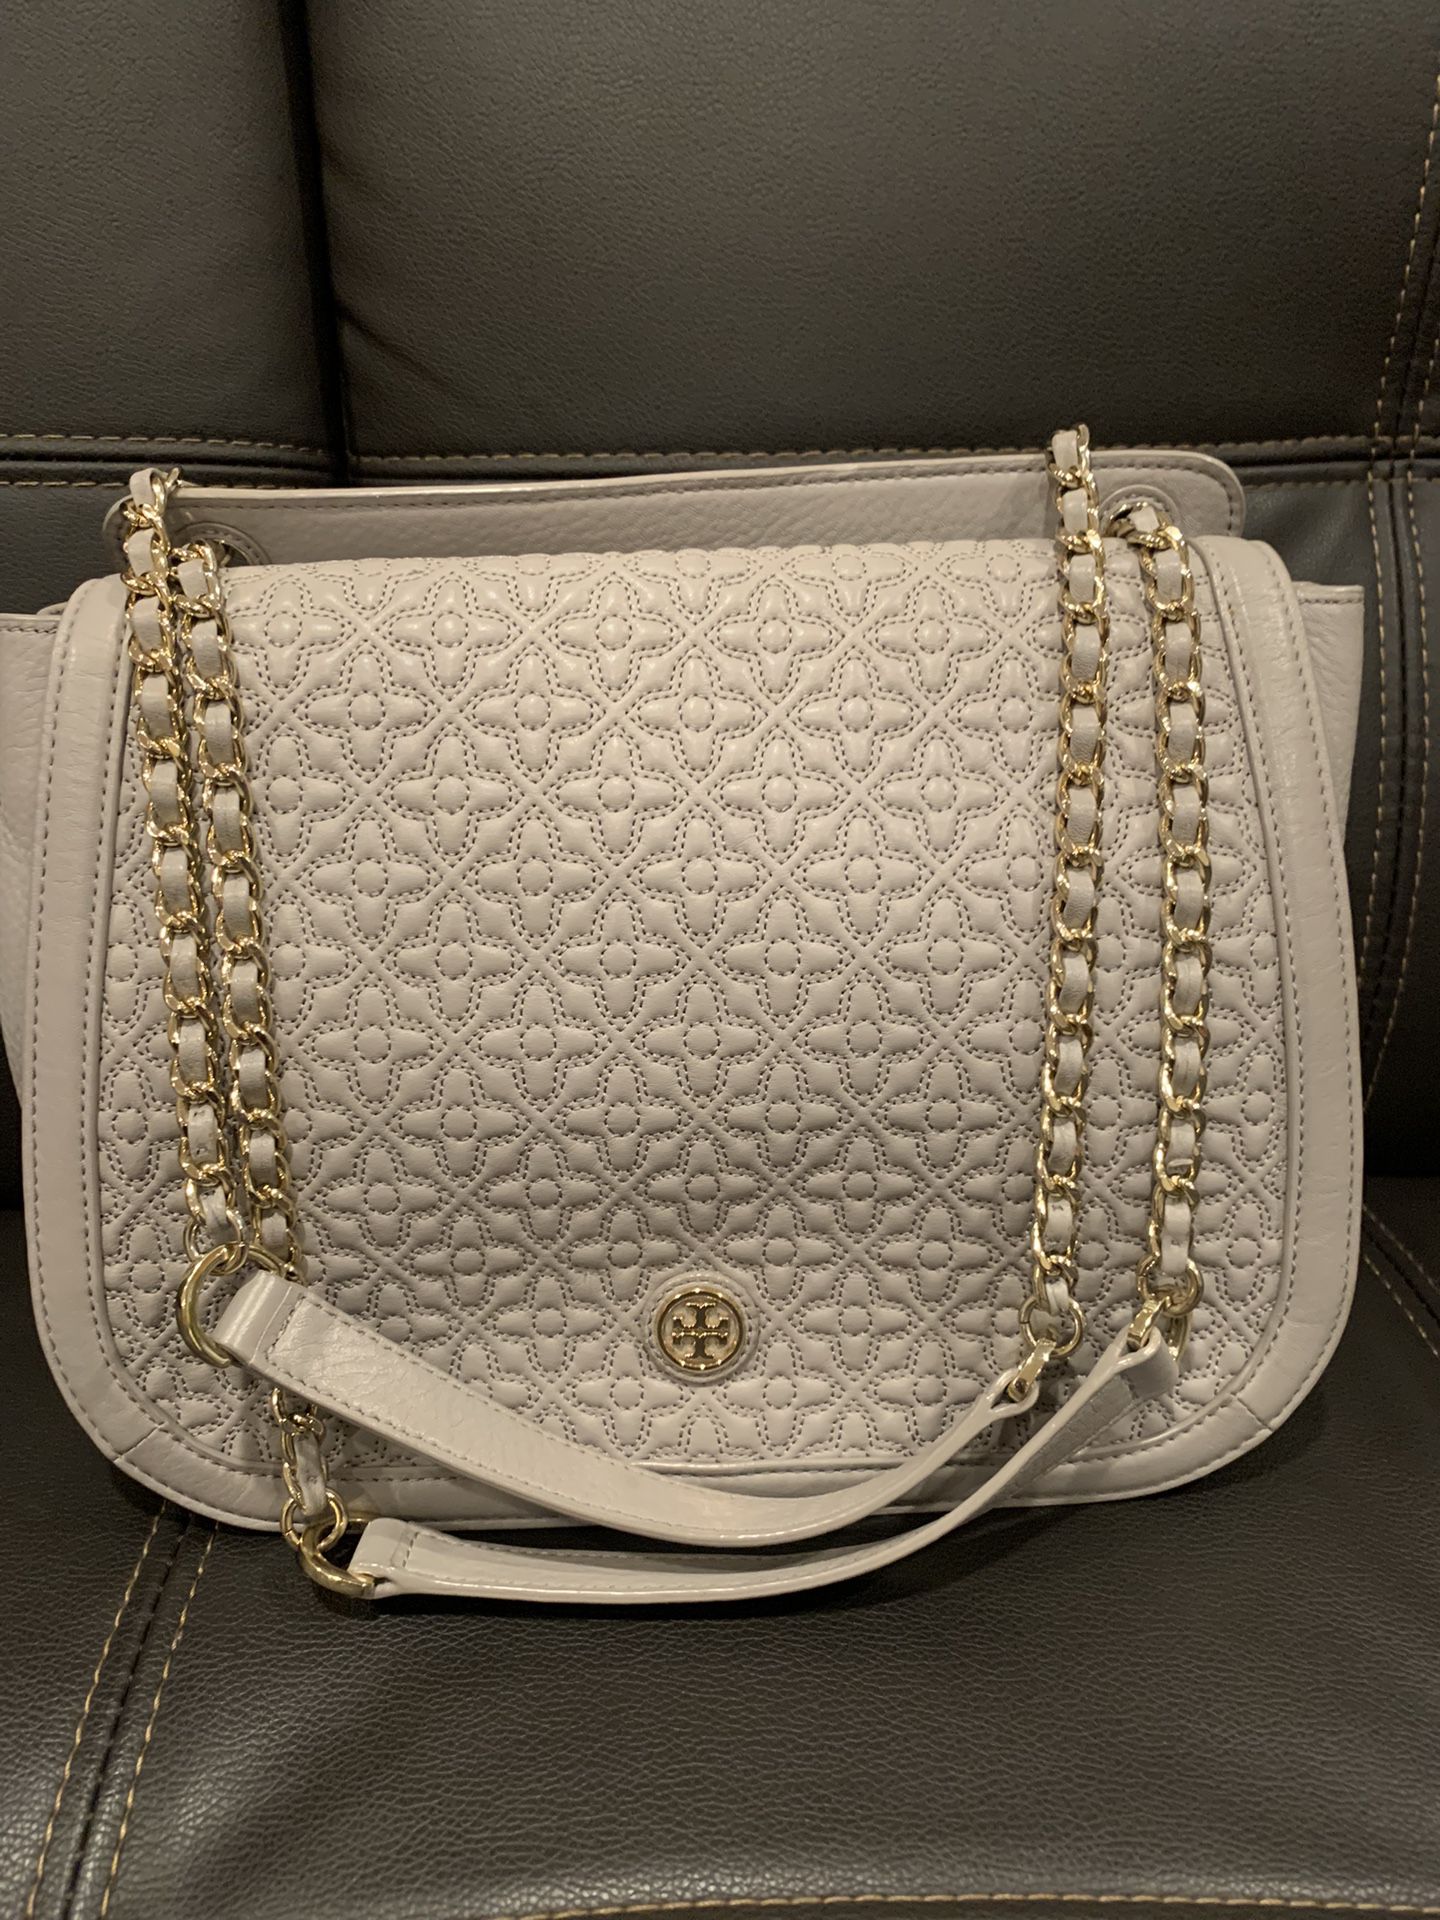 Tory Burch Convertible Leather Bag (Gray)